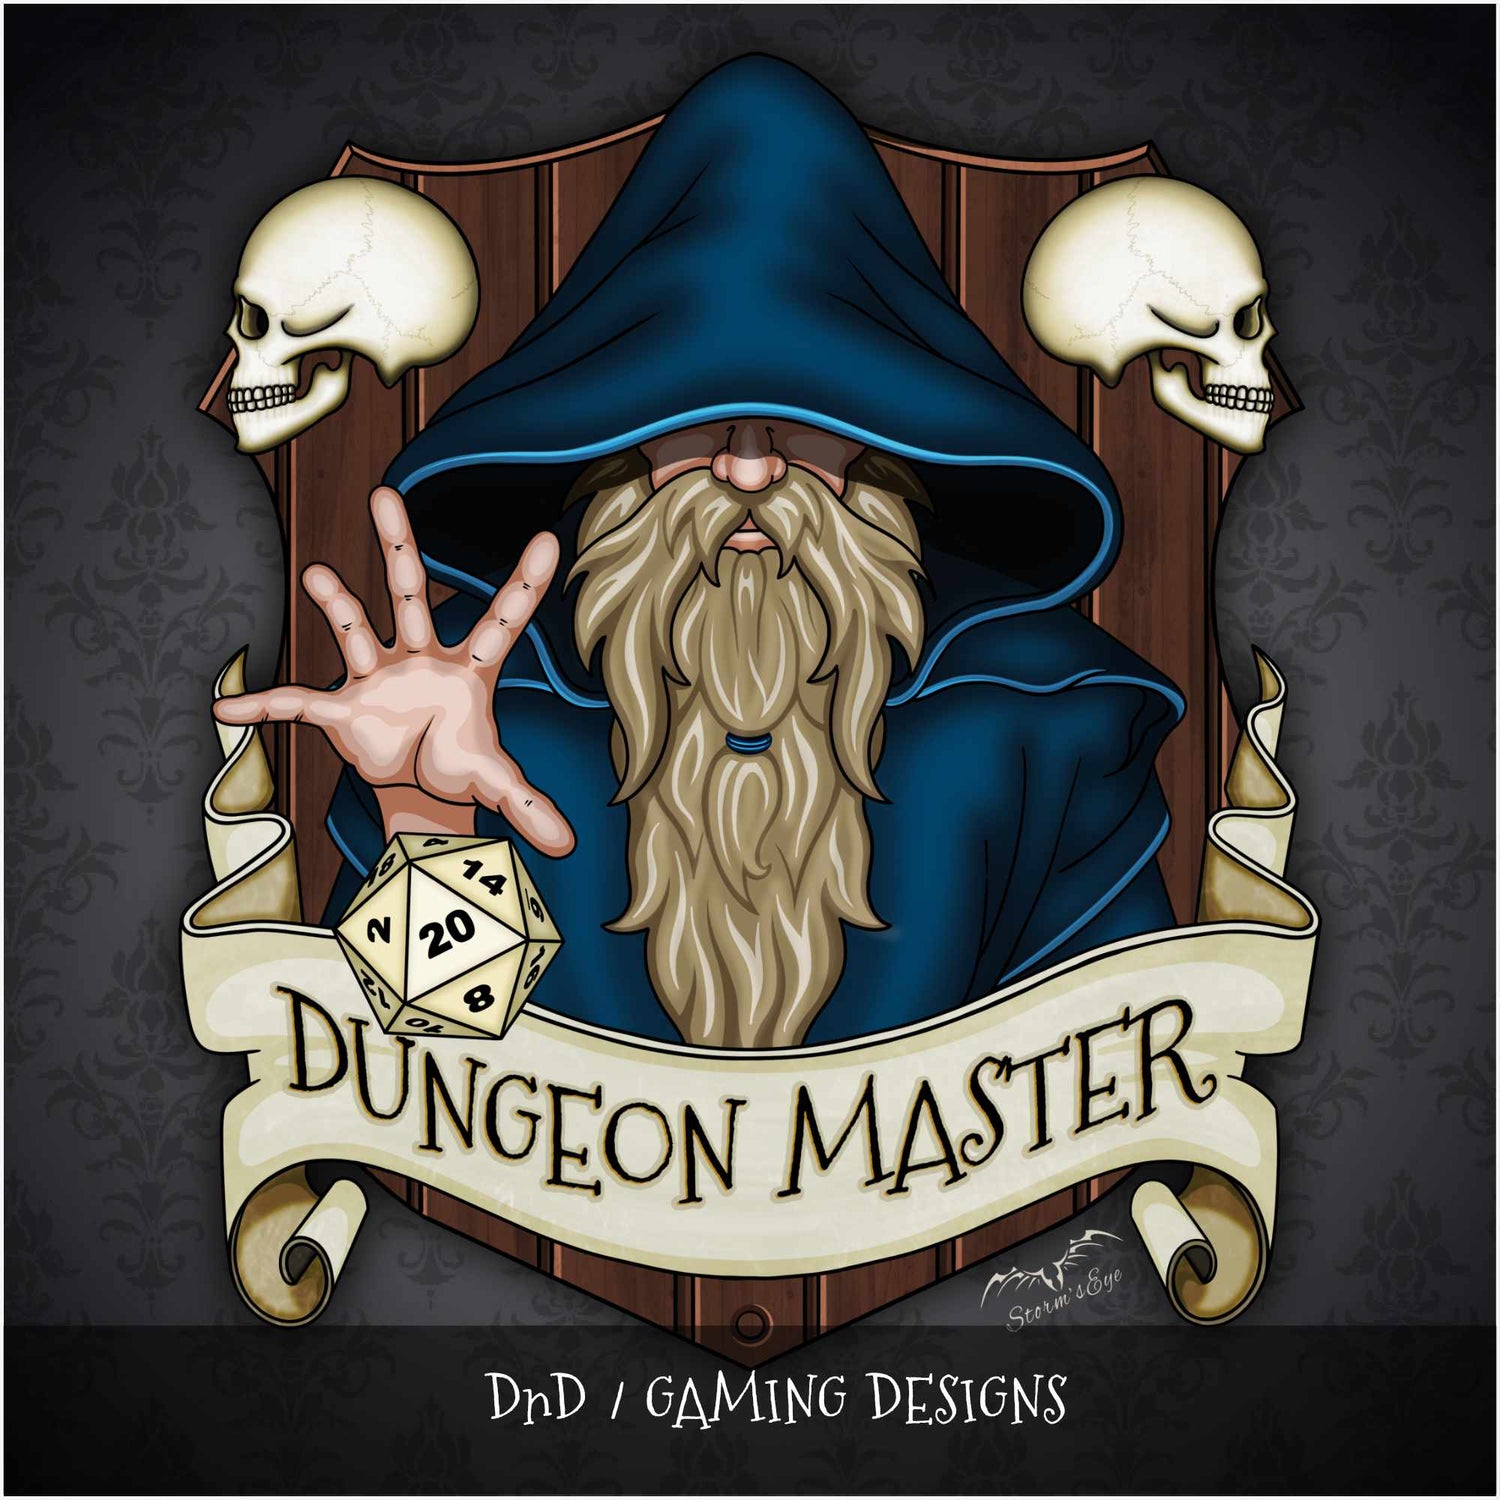 DnD / Gaming Themed Products